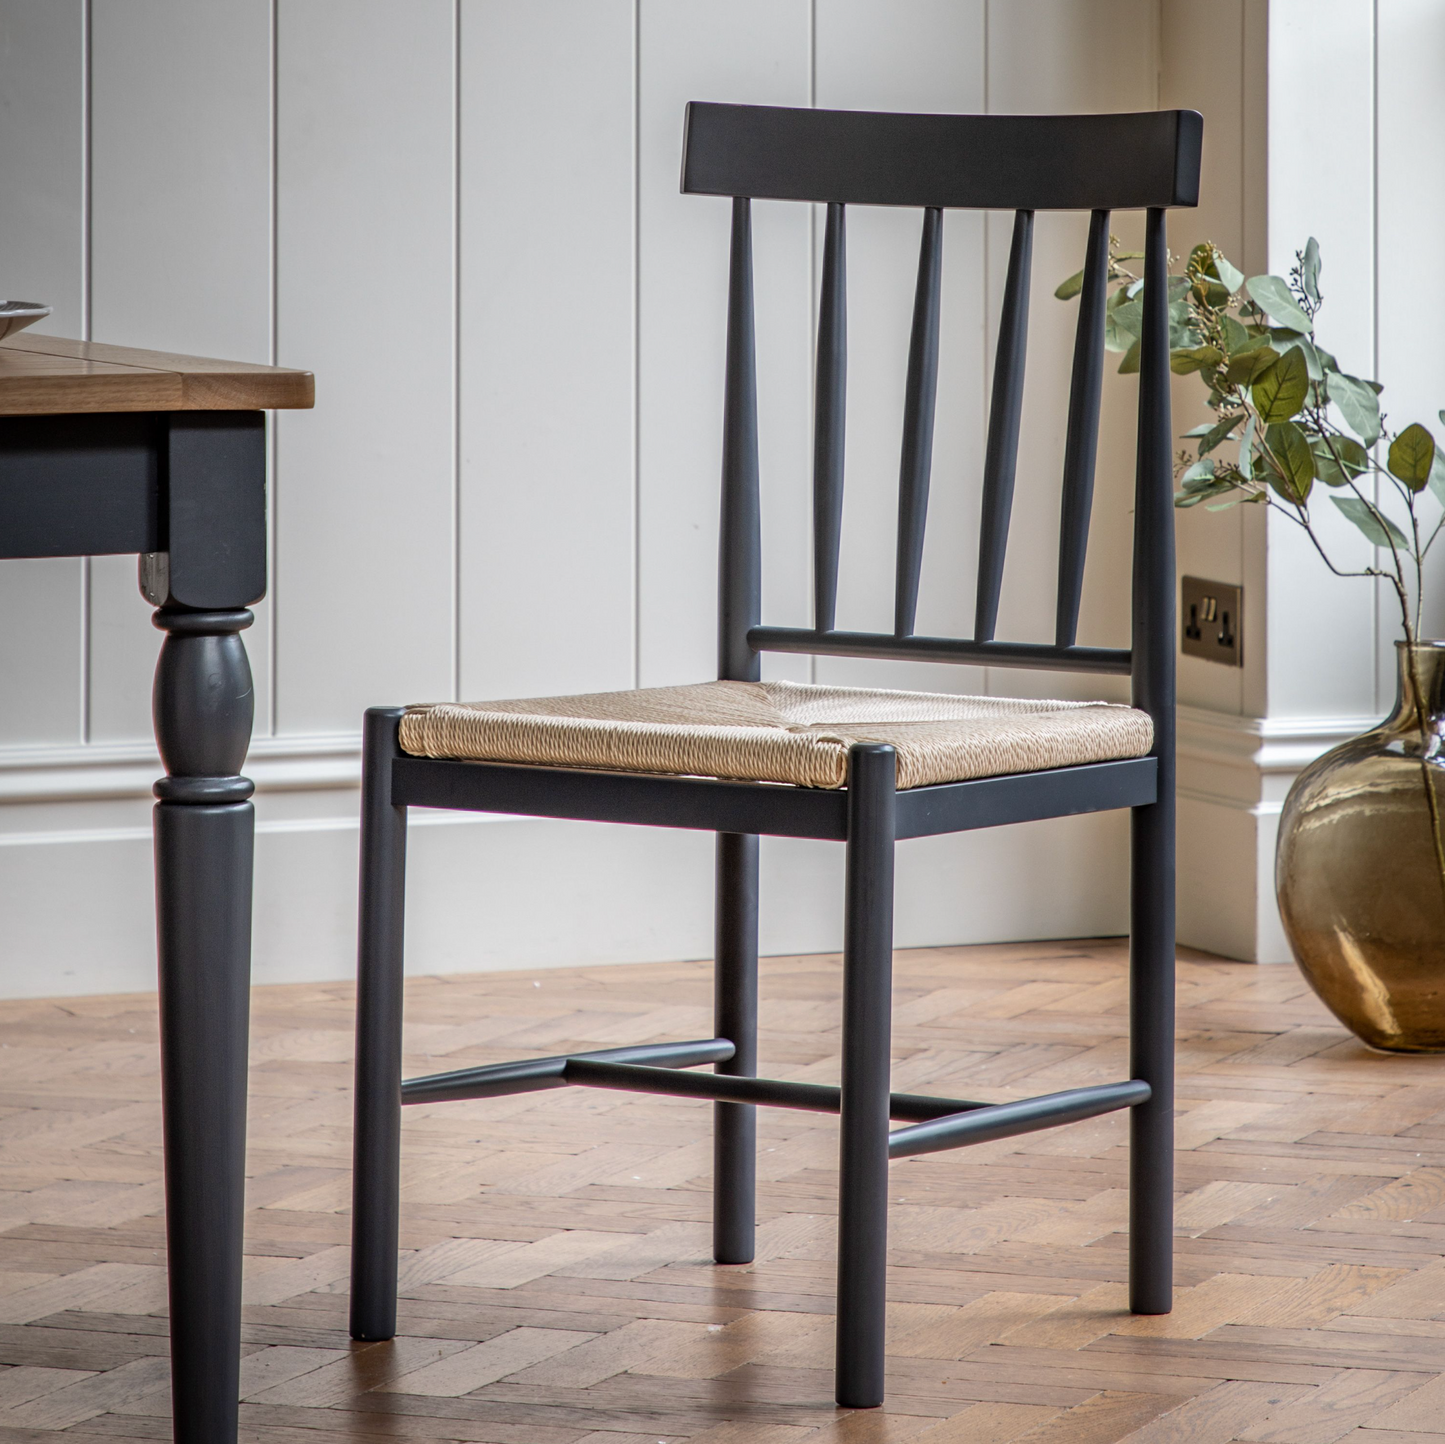 A pair of Buckland Dining Chairs in Meteor, featuring a wicker seat, for interior decor and home furniture enthusiasts.